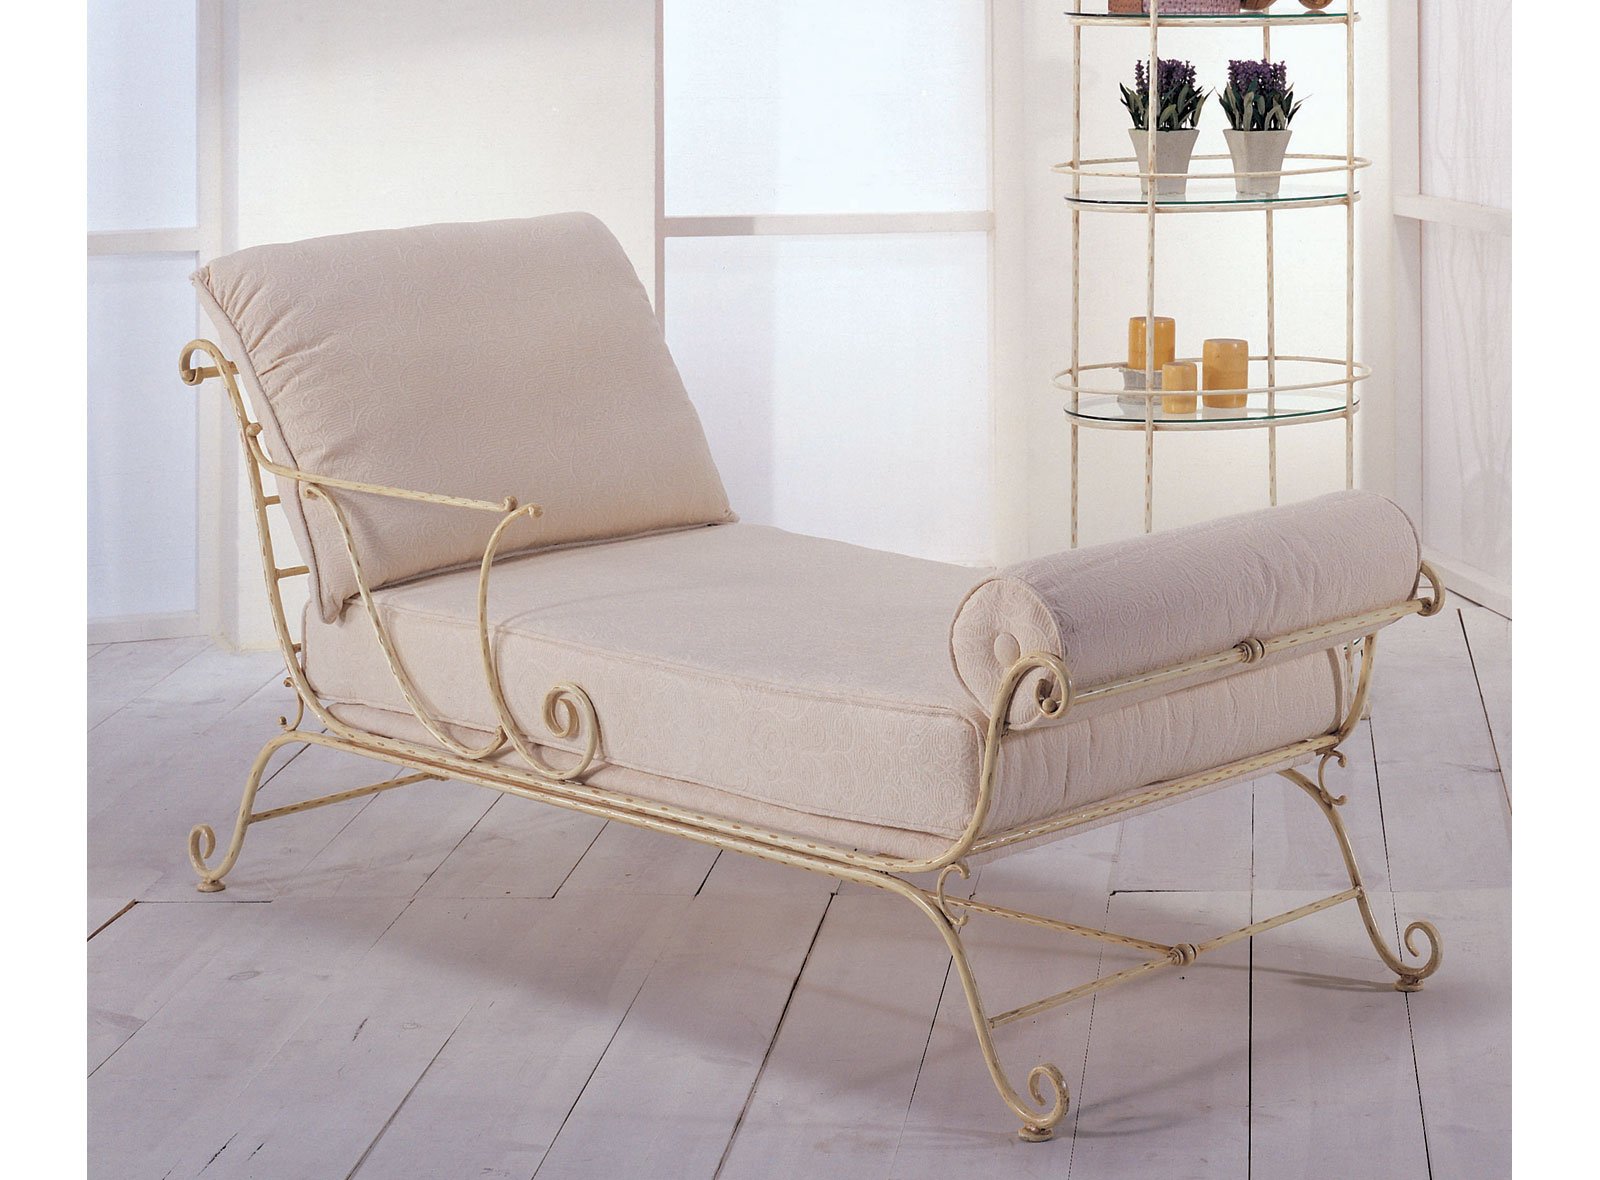 Chaise longue forja Morfeo